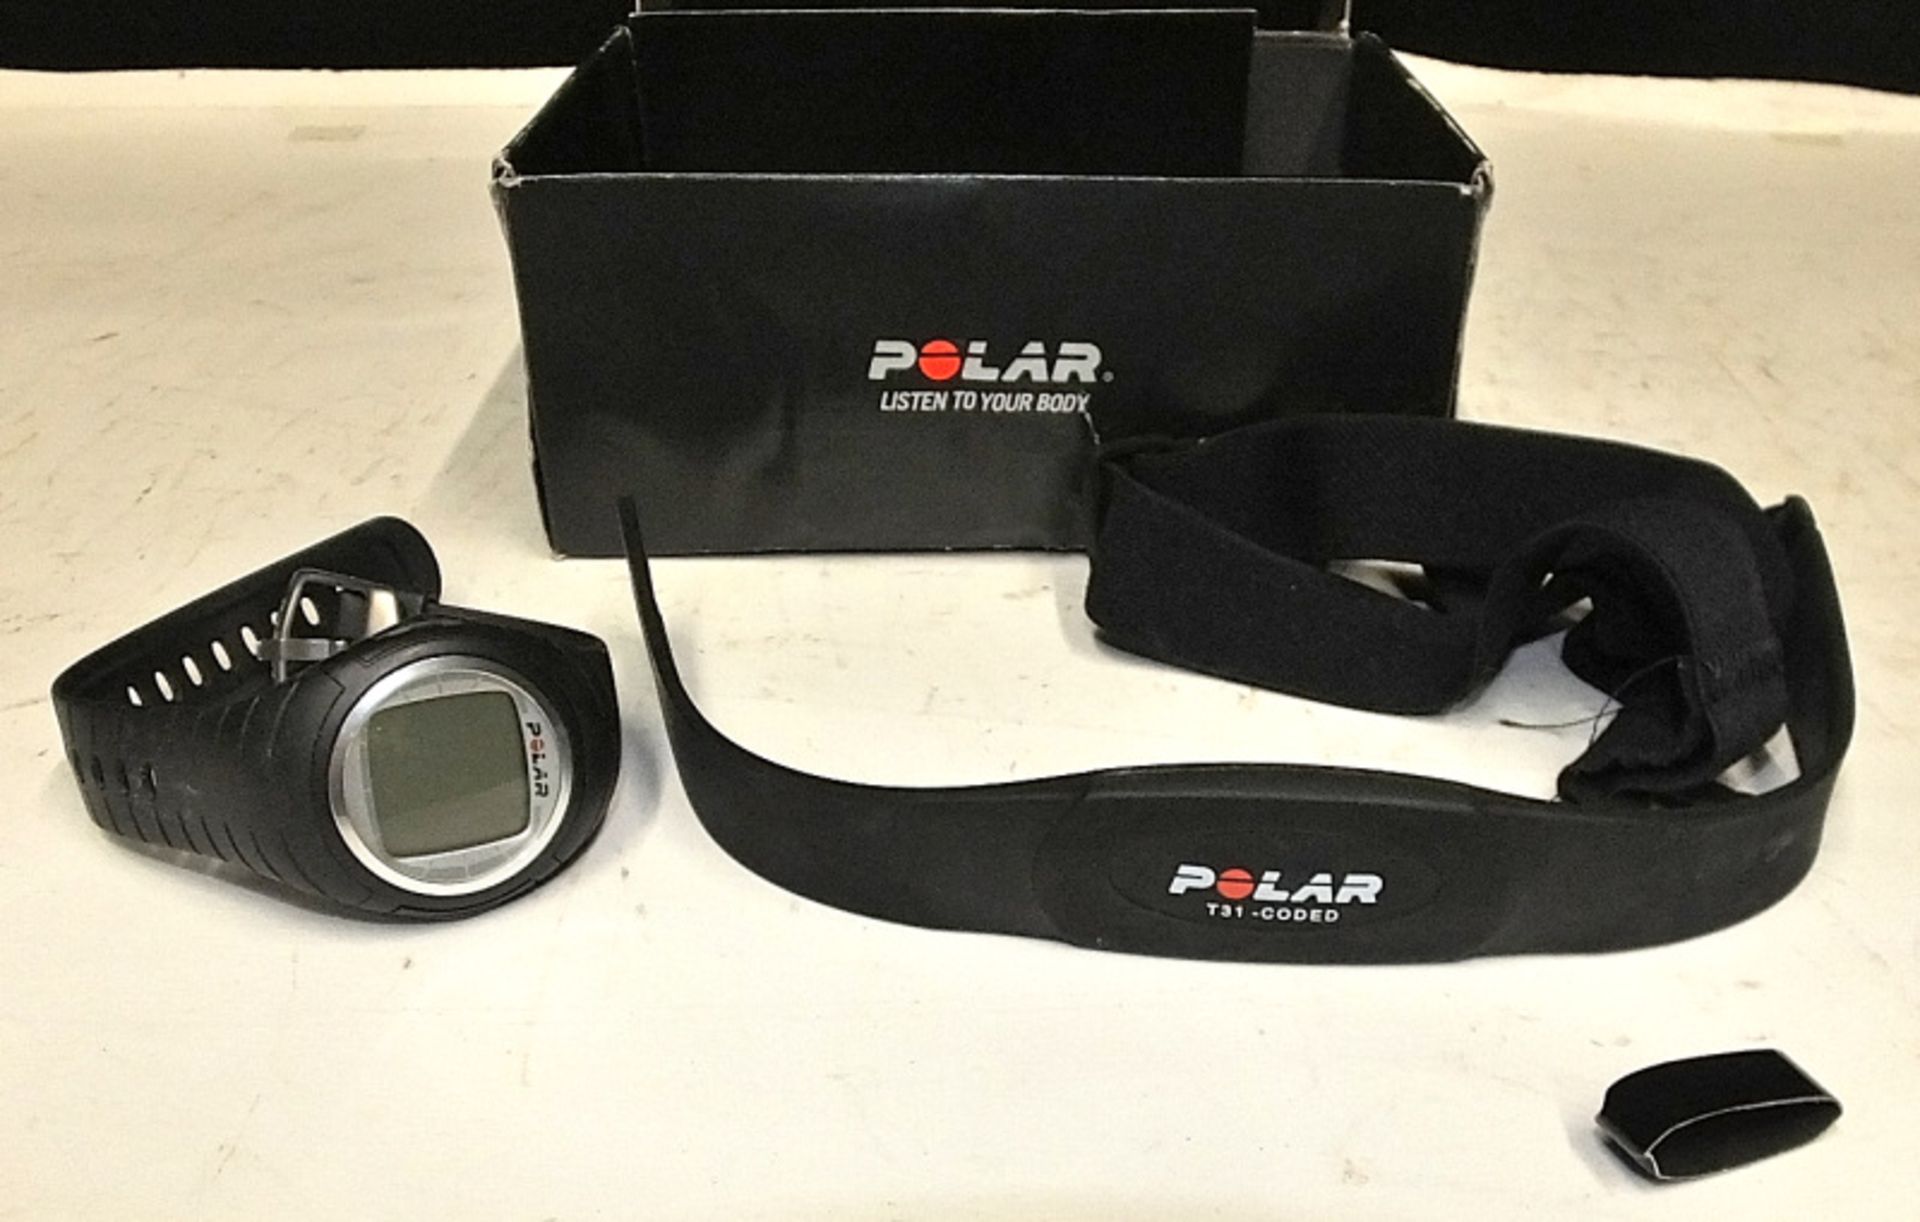 Polar F4 Fitness Heart Rate Monitor with Polar Heart Rate Chest Sensor - Image 2 of 3